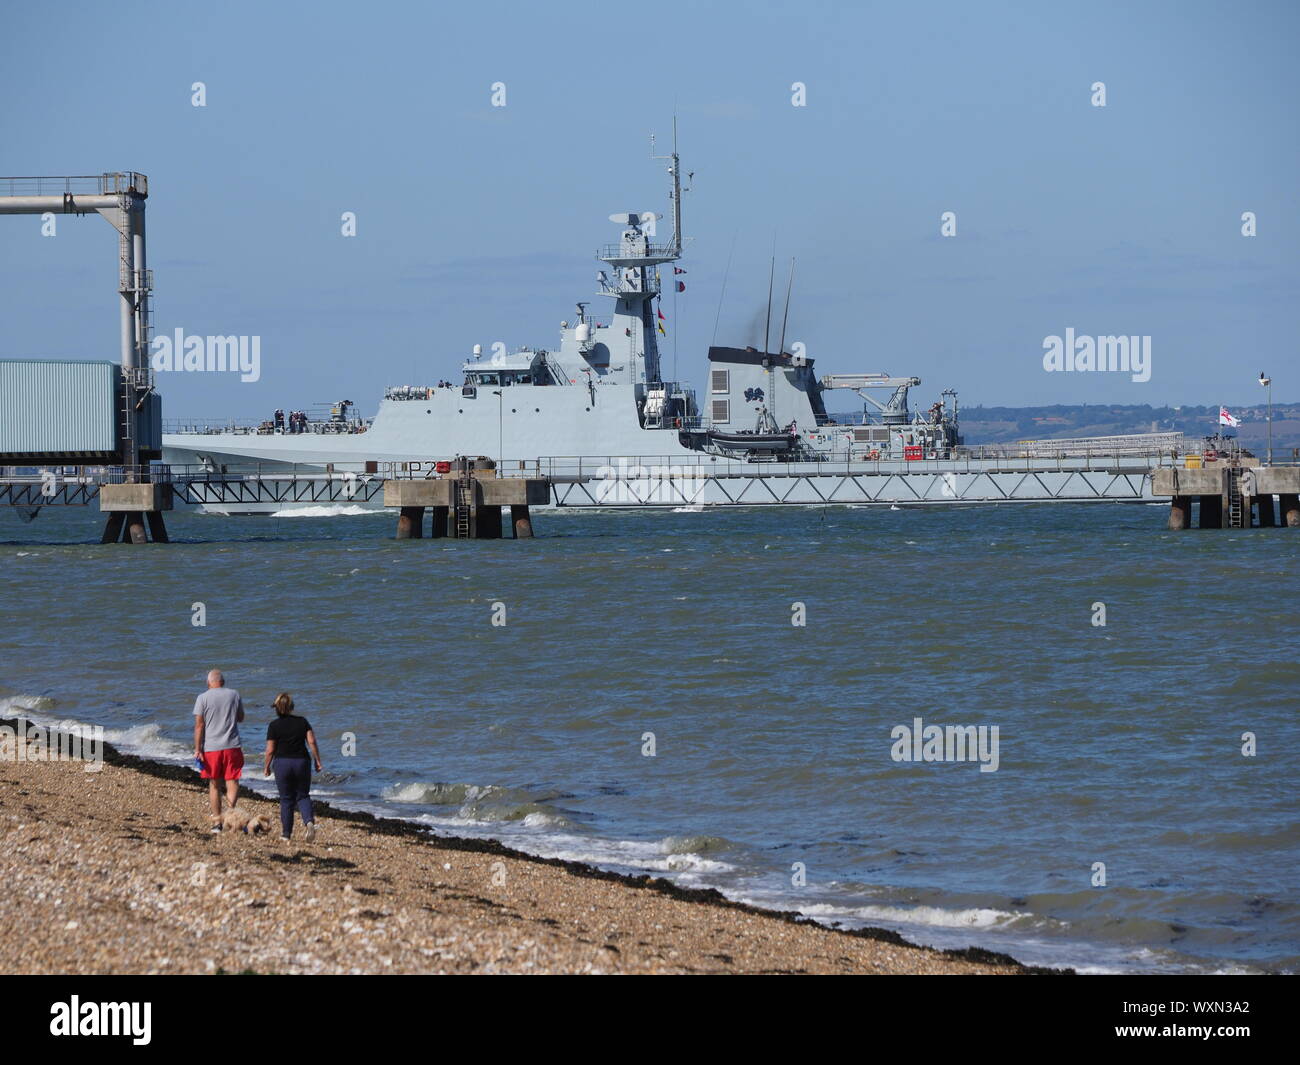 Sheerness, Kent, UK. 17th September, 2019. HMS Medway entering the river Medway at Sheerness, Kent at lunchtime. She is headed to Chatham unusually will be officially commisioned at the place she is named after during her stay. HMS Medway is a 90-metre offshore patrol vessel and will be involved in counter-terrorism and anti-smuggling operations to help keep Britain safe. Credit: James Bell/Alamy Live News Stock Photo